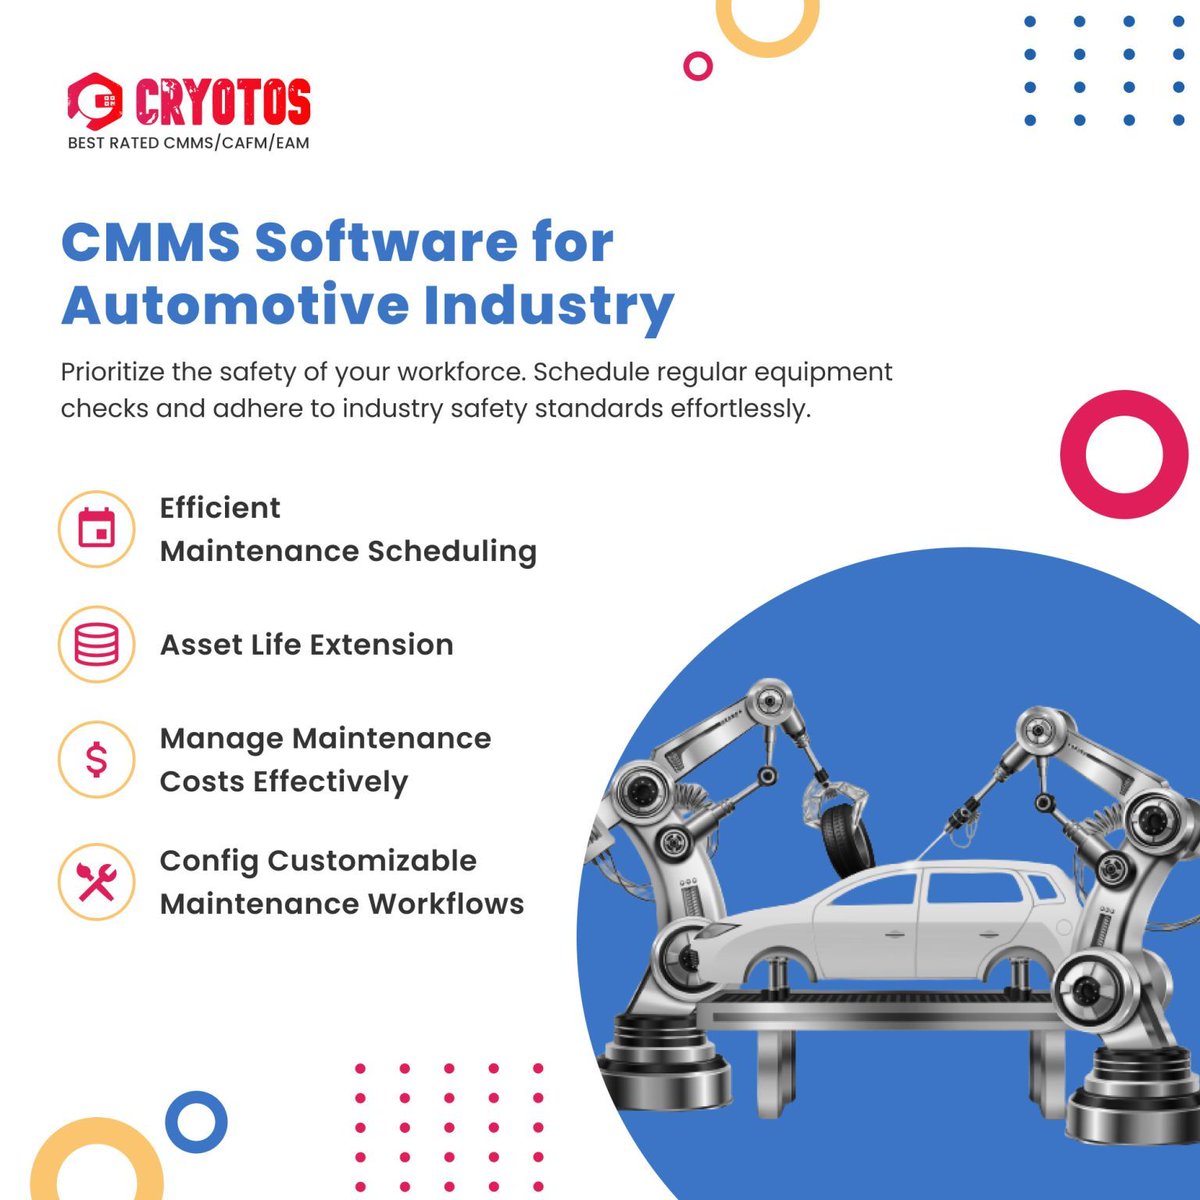 Maximize ROI and streamline your maintenance operations with Cryotos CMMS Software. Designed specifically for the automotive industry, our platform centralizes data, reduces downtime by 30%, and decreases repair times by 25%. #cmms #cmmssoftware #automotive #maintenance